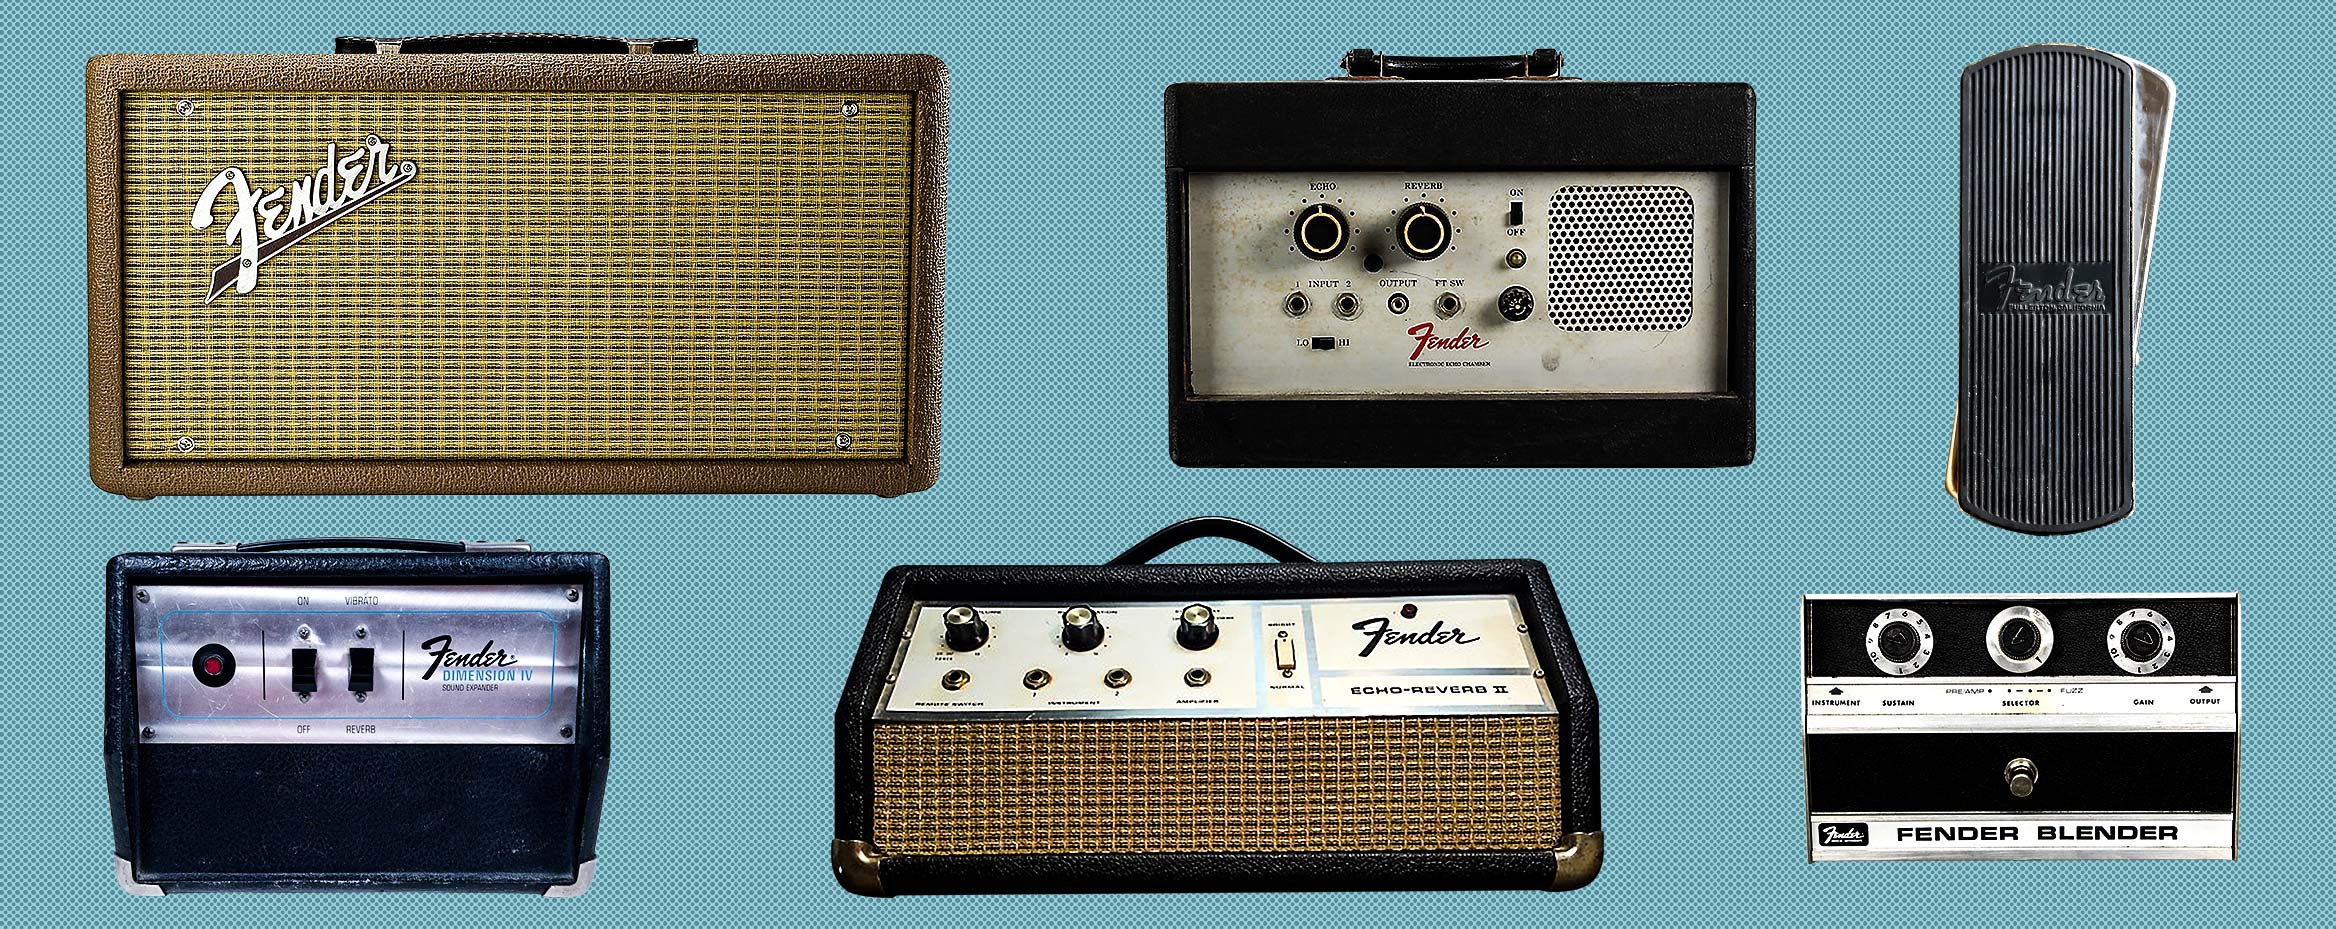 Vintage Fender Effects From the 1950s-1980s | Fender Guitars